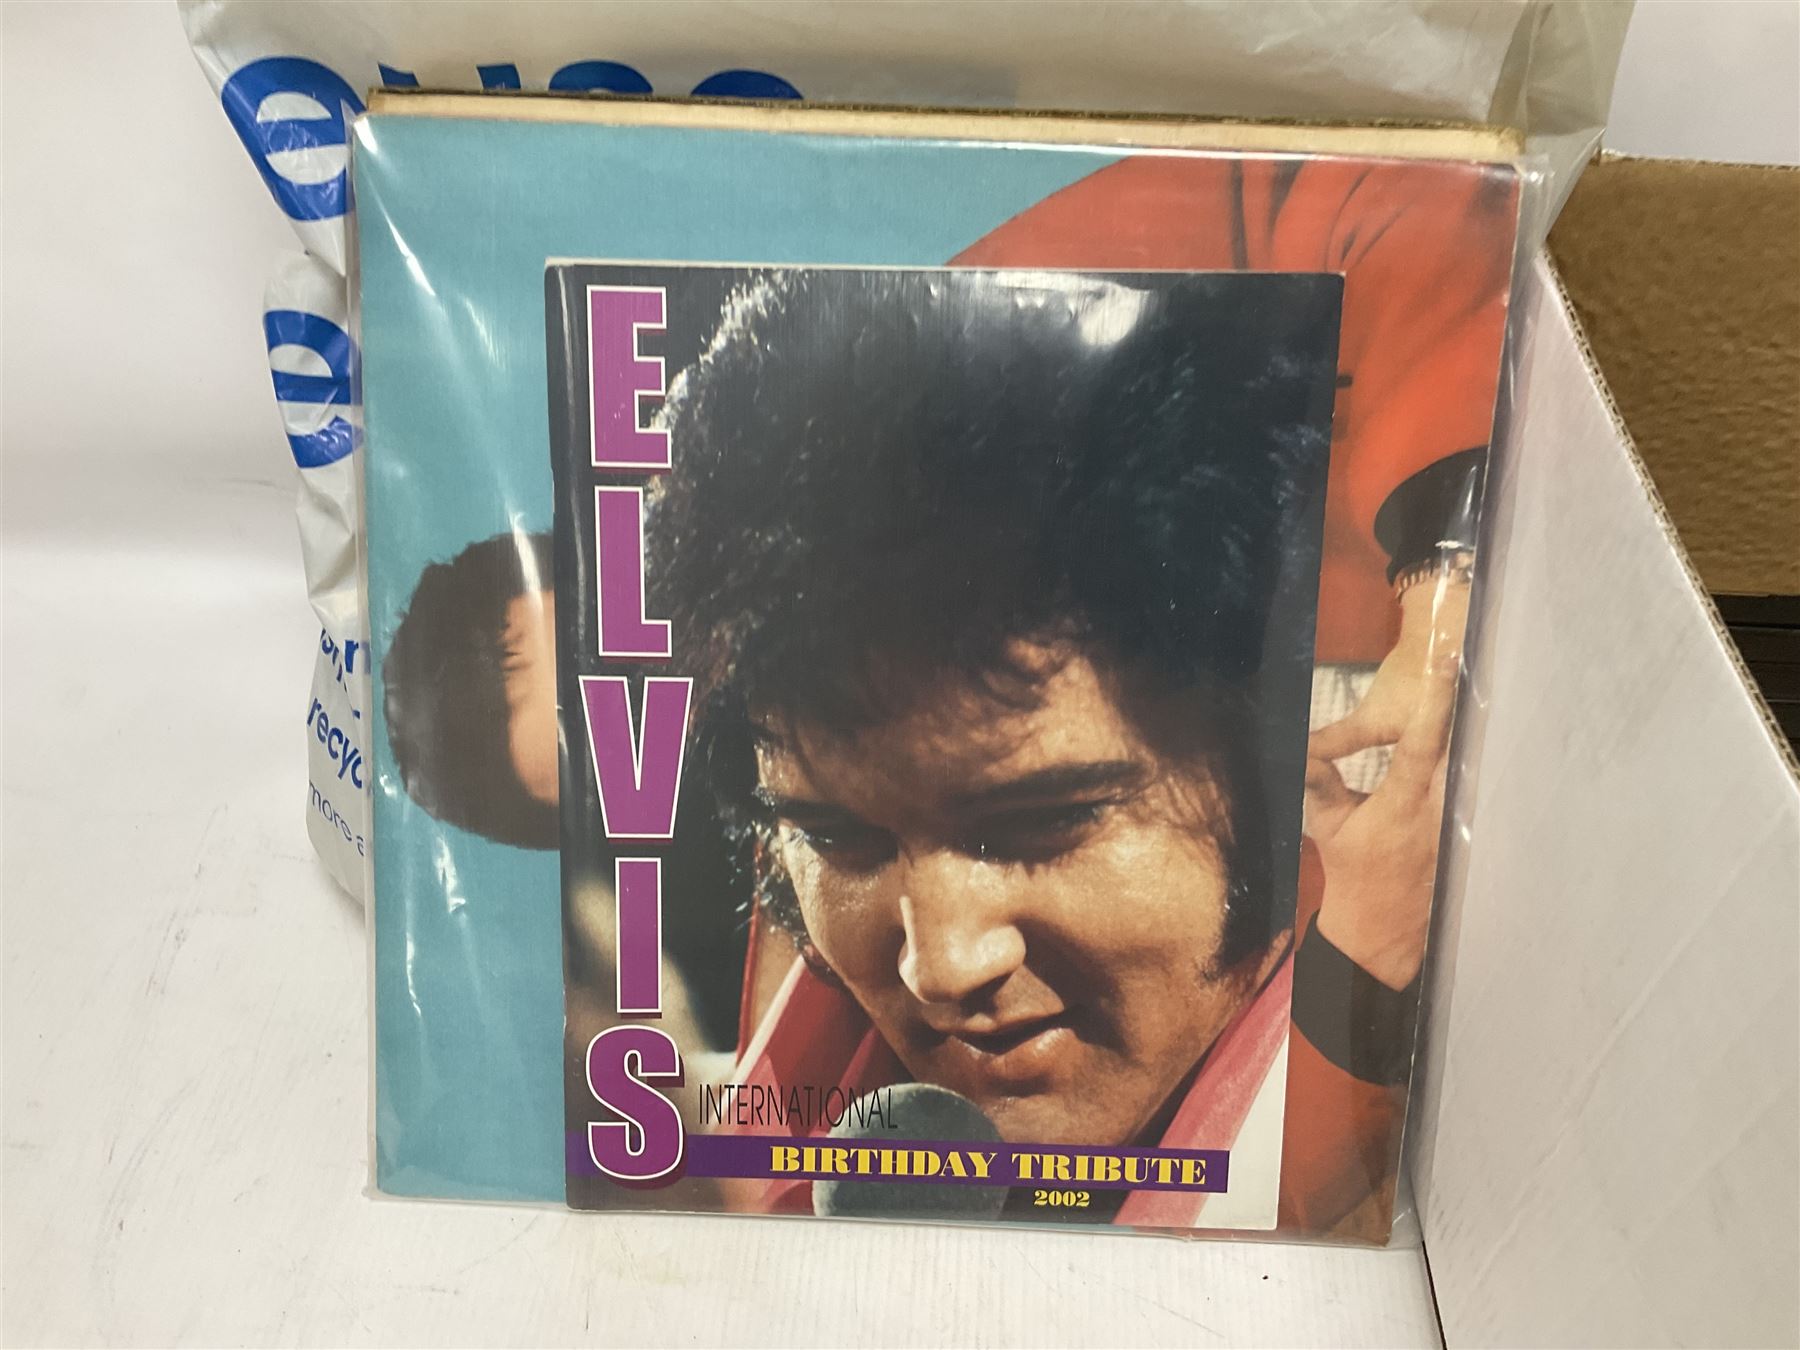 Thirty-one LP records including Everly brothers - Image 6 of 9